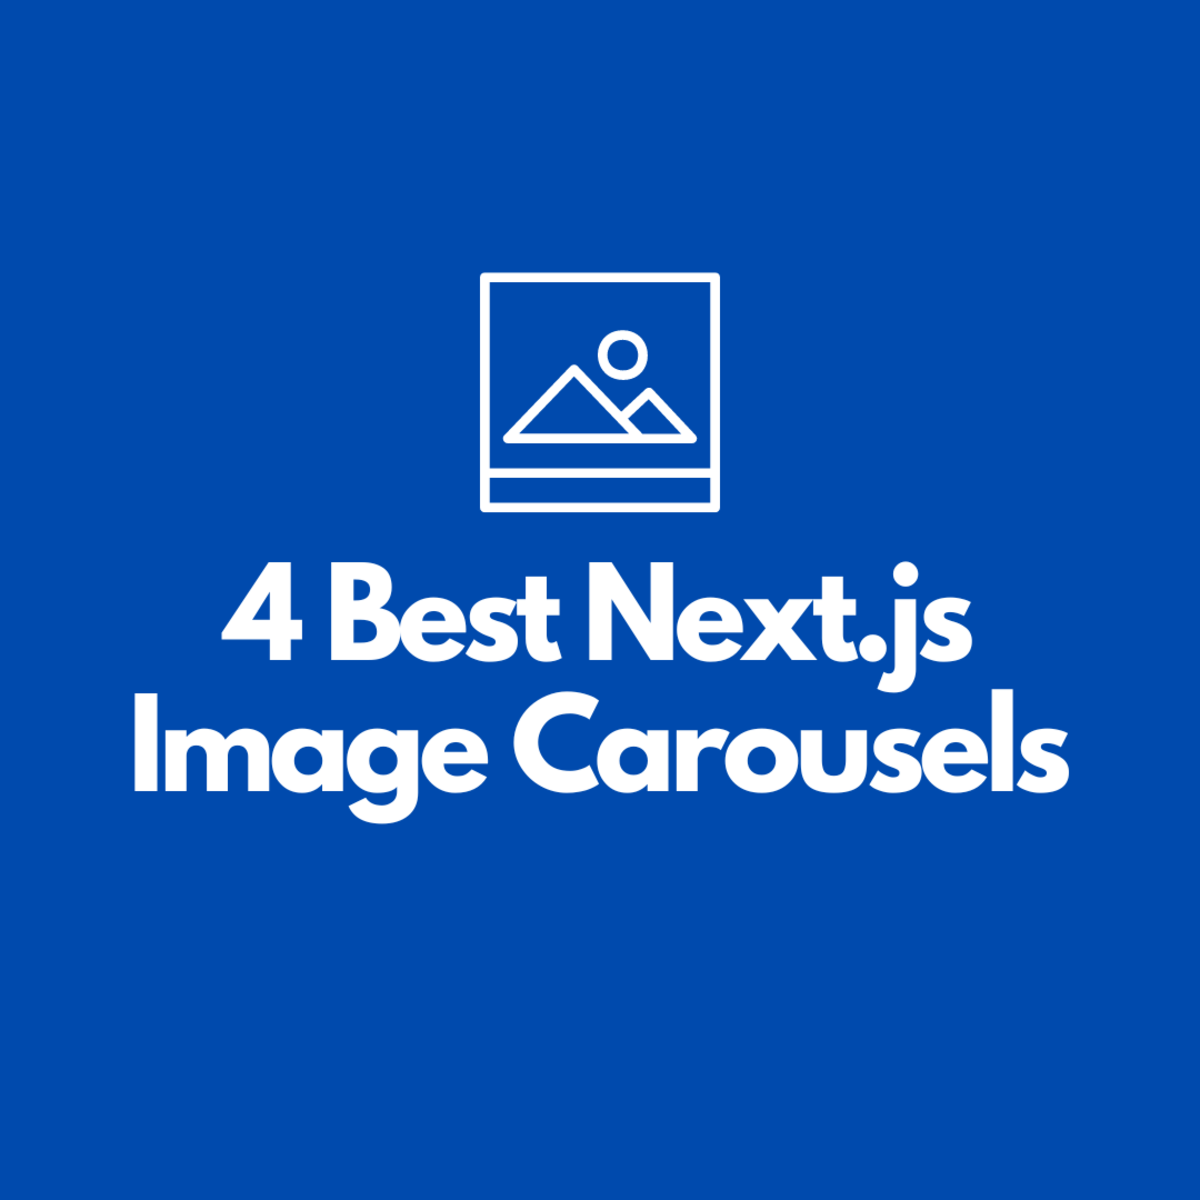 4 Best Next.js Image Carousels: The Ultimate List